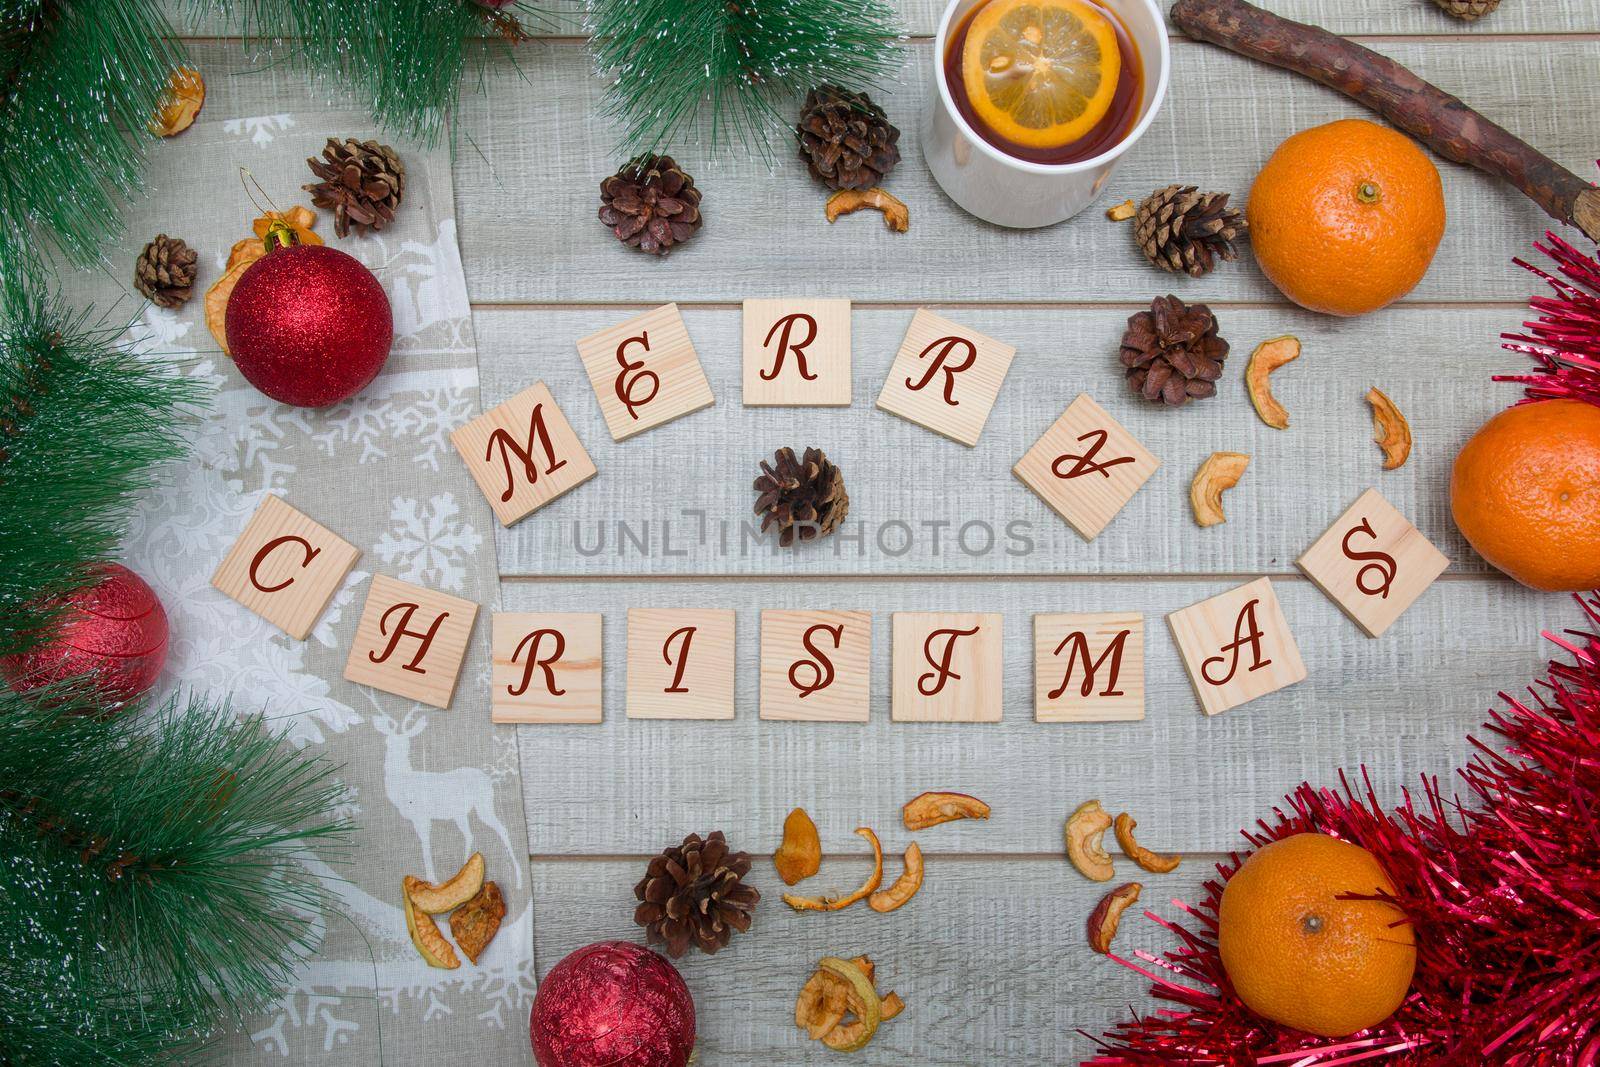 pine branches, Christmas toys, tangerines, tea with lemon, Christmas mood, top view, wooden background by natashko